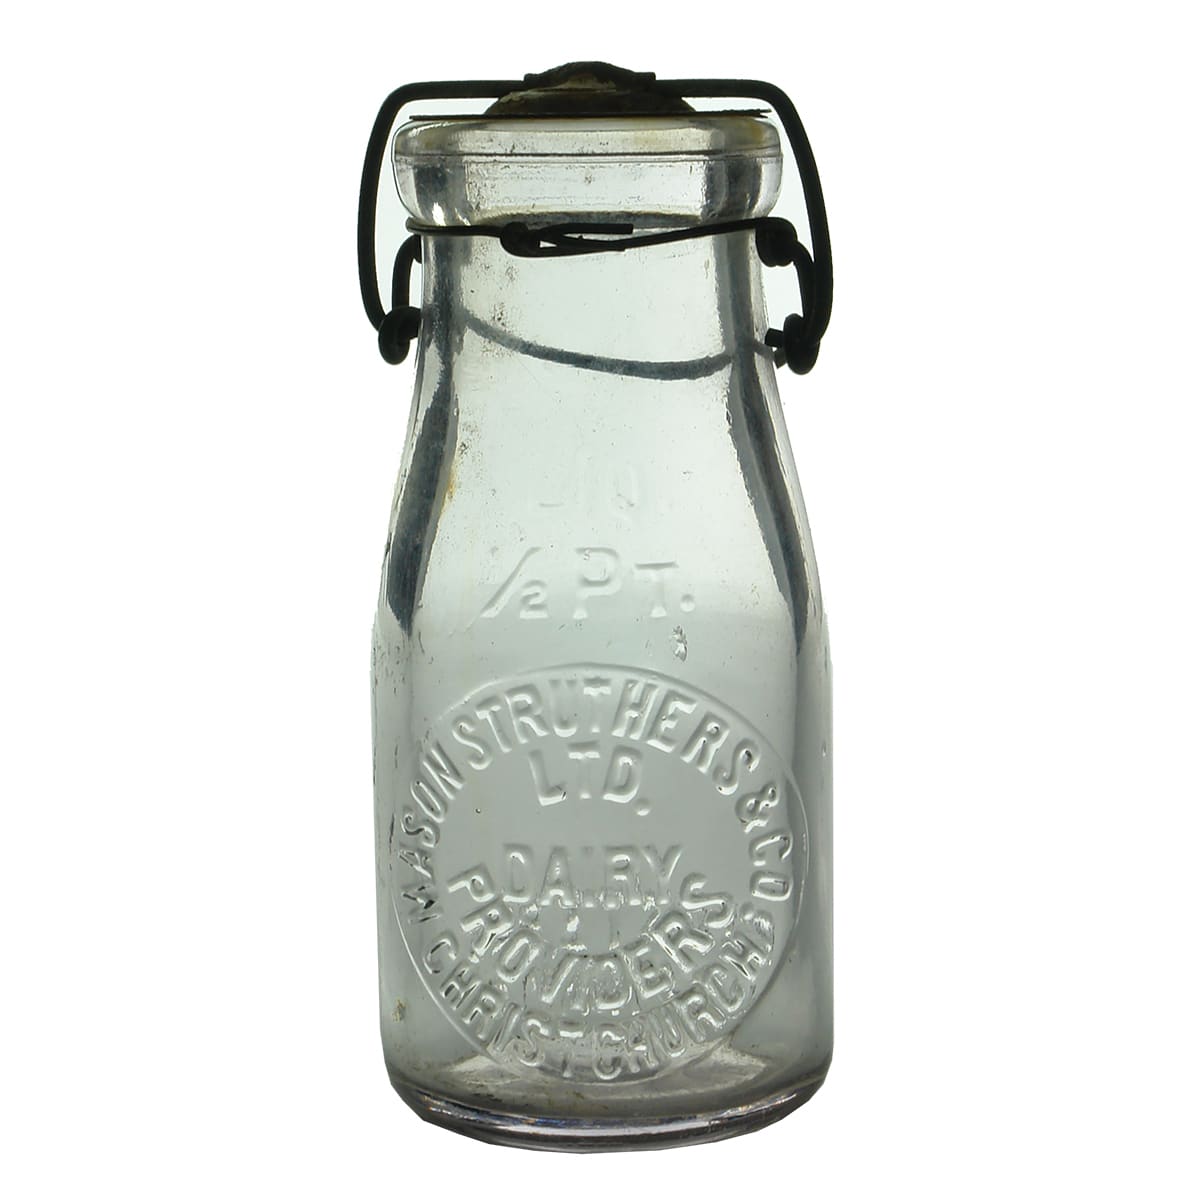 Milk. Mason Struthers & Co. Ltd., Christchurch. Wide mouth with tin cap. Amethyst. 1/2 Pint.